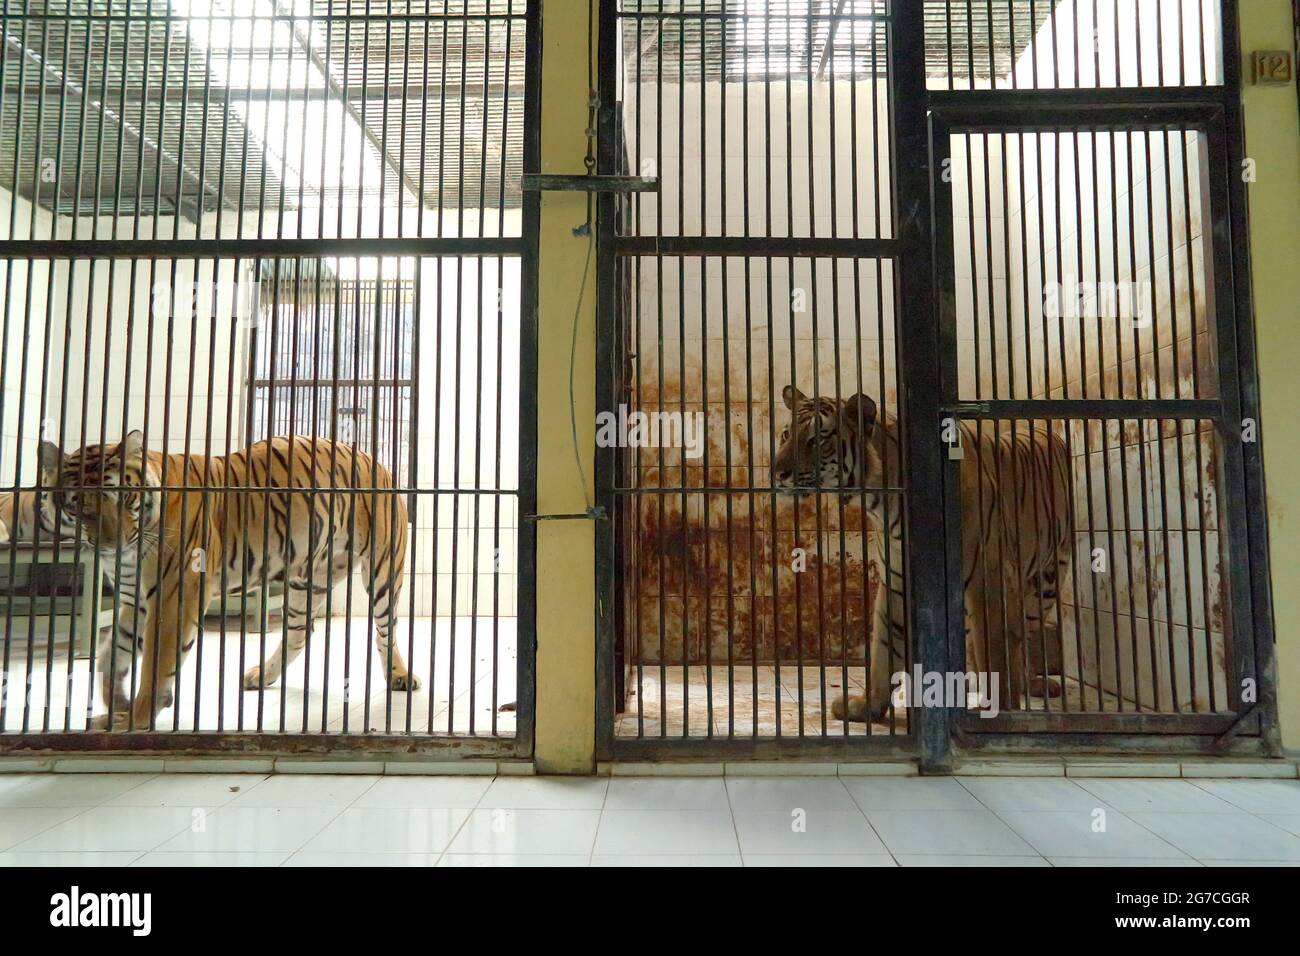 Sumatran tiger (left) and Bengal tiger (right) at the veterinary facility managed by Bali Zoo in Gianyar, Bali, Indonesia. Stock Photo